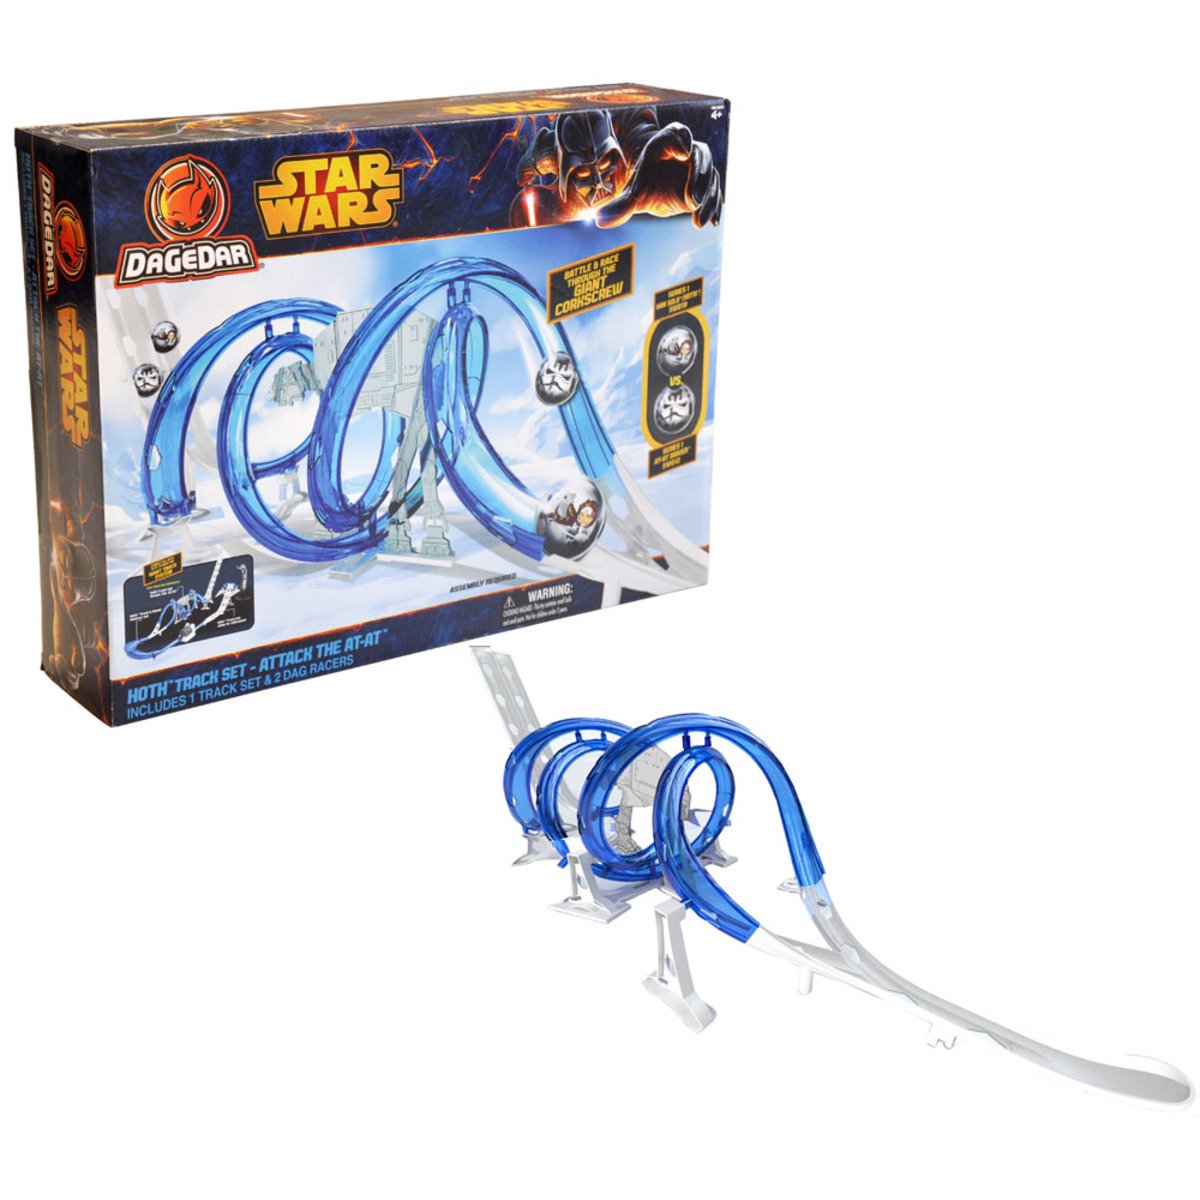 Majorette - Star Wars Battle Of Hoth Track Attack The AT-AT